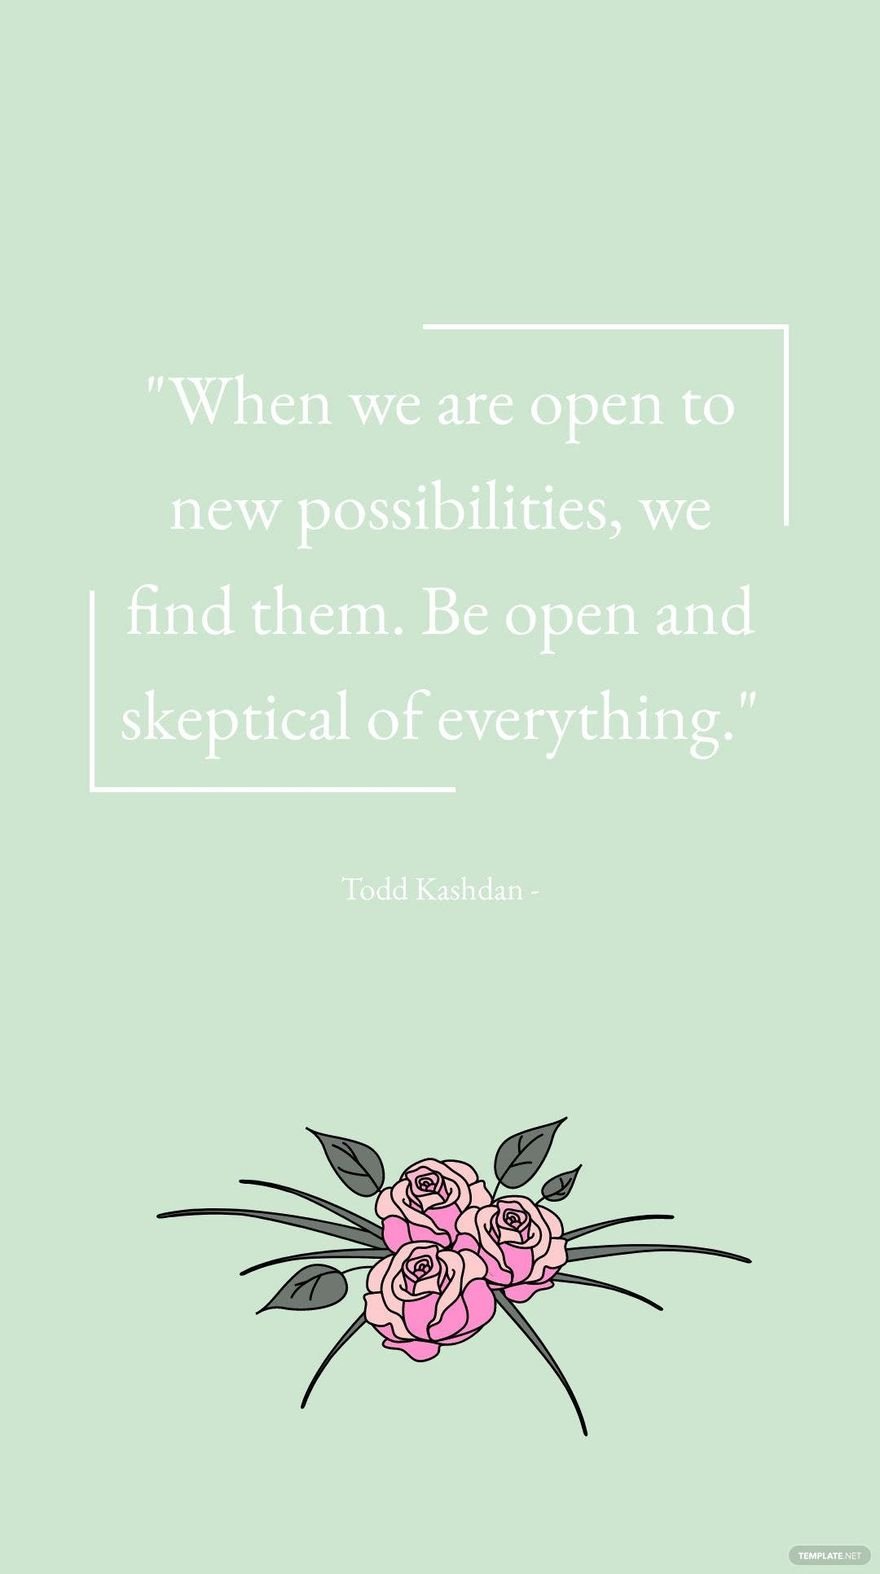 Todd Kashdan - When we are open to new possibilities, we find them. Be open and skeptical of everything.